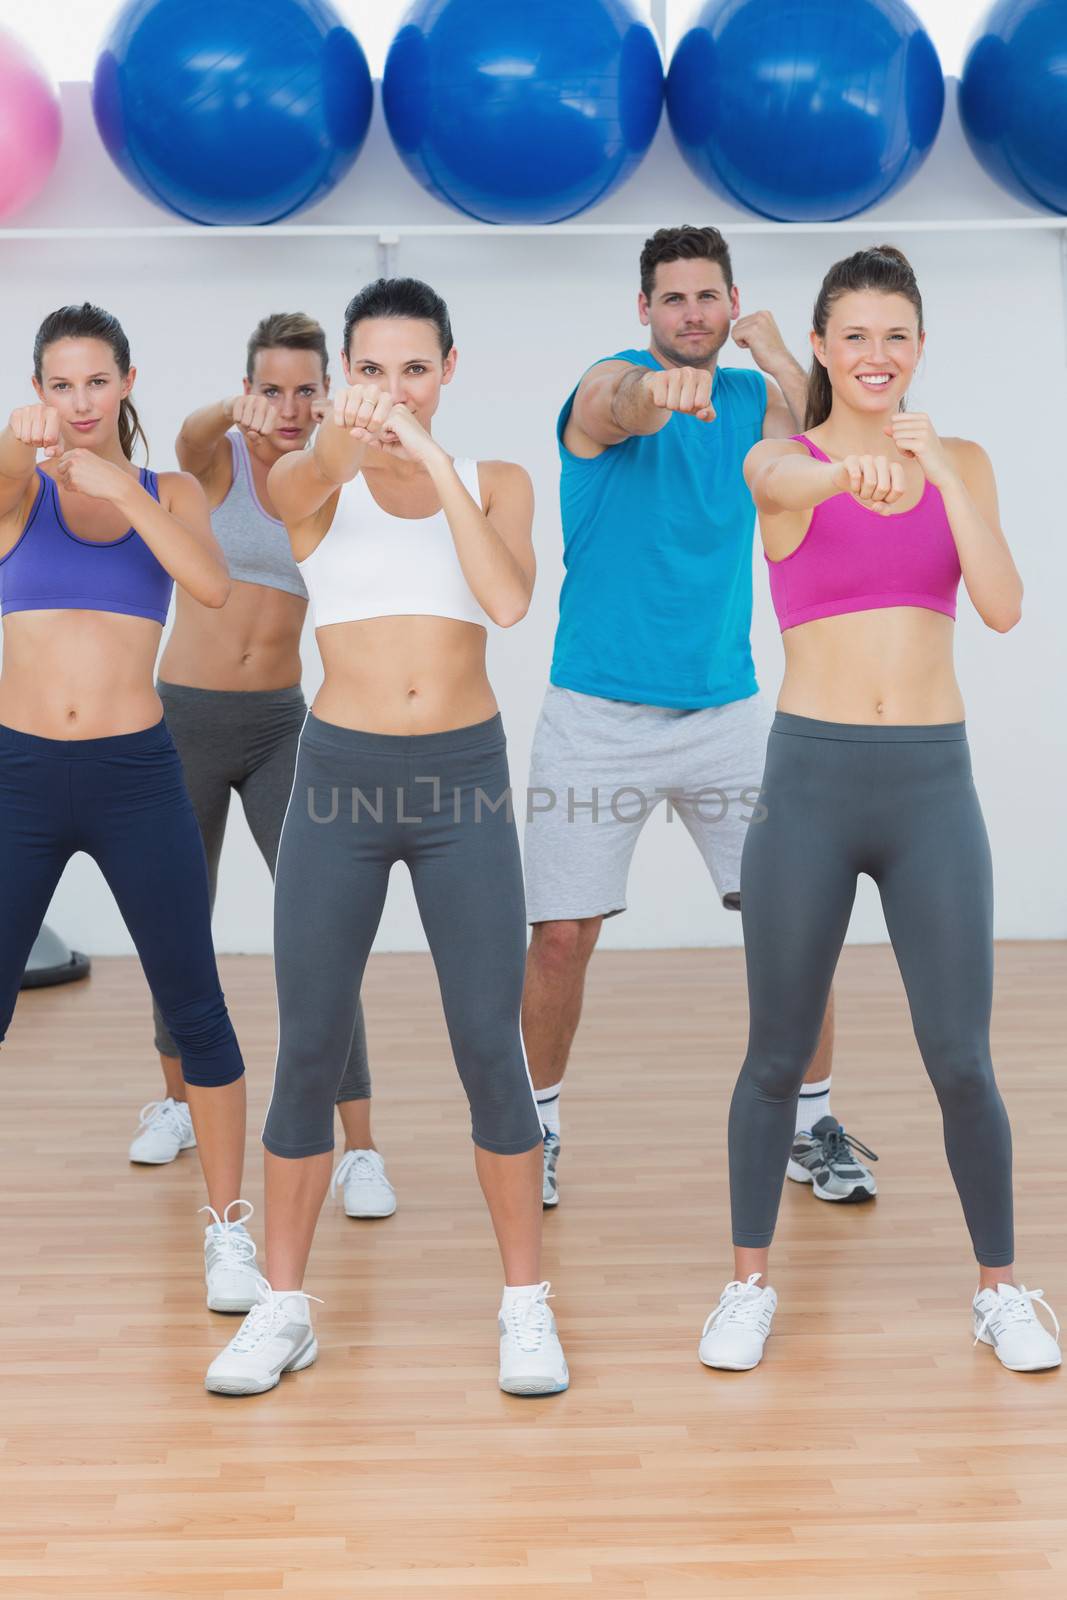 Portrait of smiling people doing power fitness exercise at yoga class in fitness studio